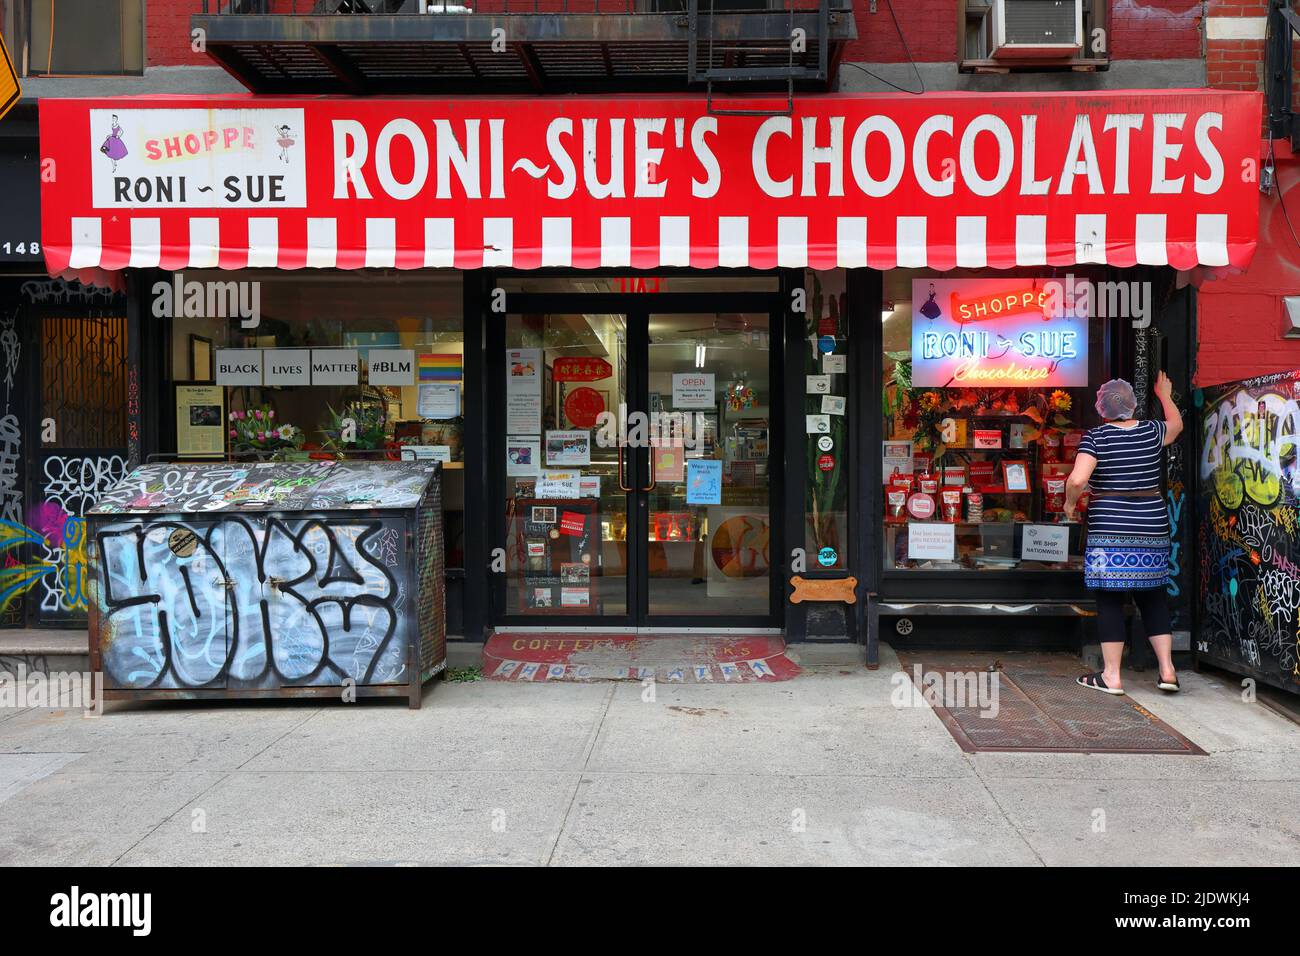 Roni-Sue's Chocolates, 148 Forsyth St, New York, NY. exterior storefront of a chocolate shop in the Lower East Side neighborhood in Manhattan. Stock Photo